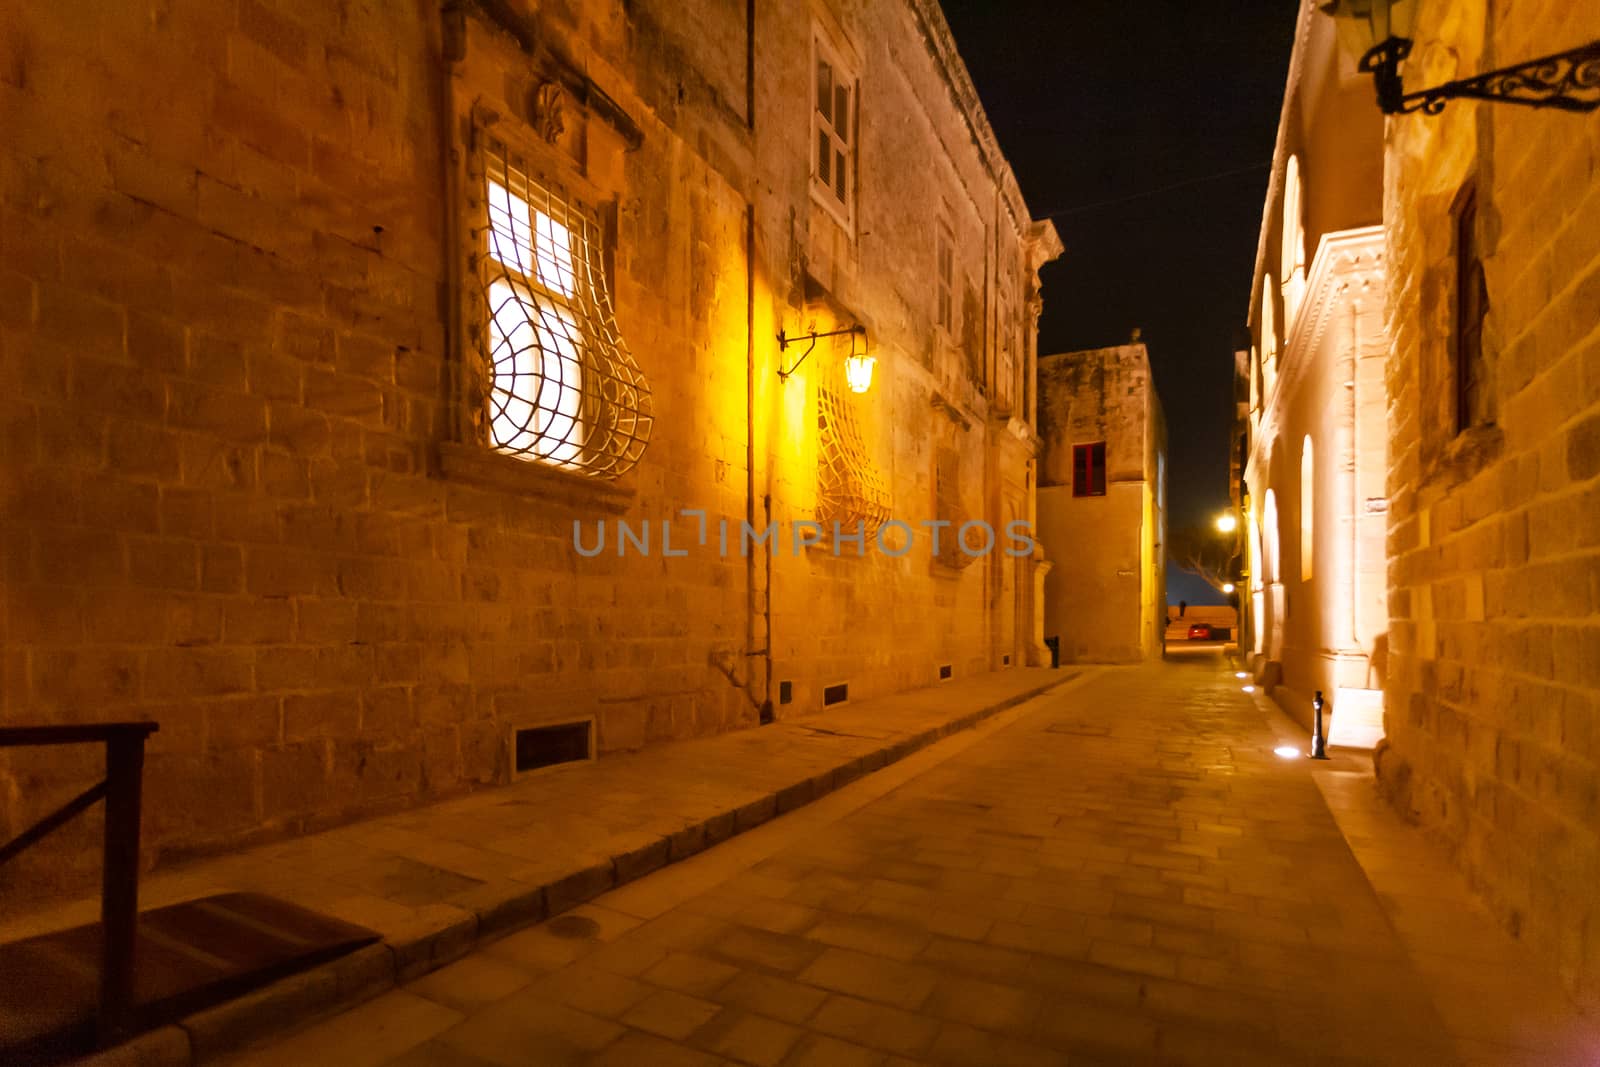 Narrow streets of Mdina, ancient capital of Malta. Night view on illuminated buildings and wall decorations of ancient town. by aksenovko